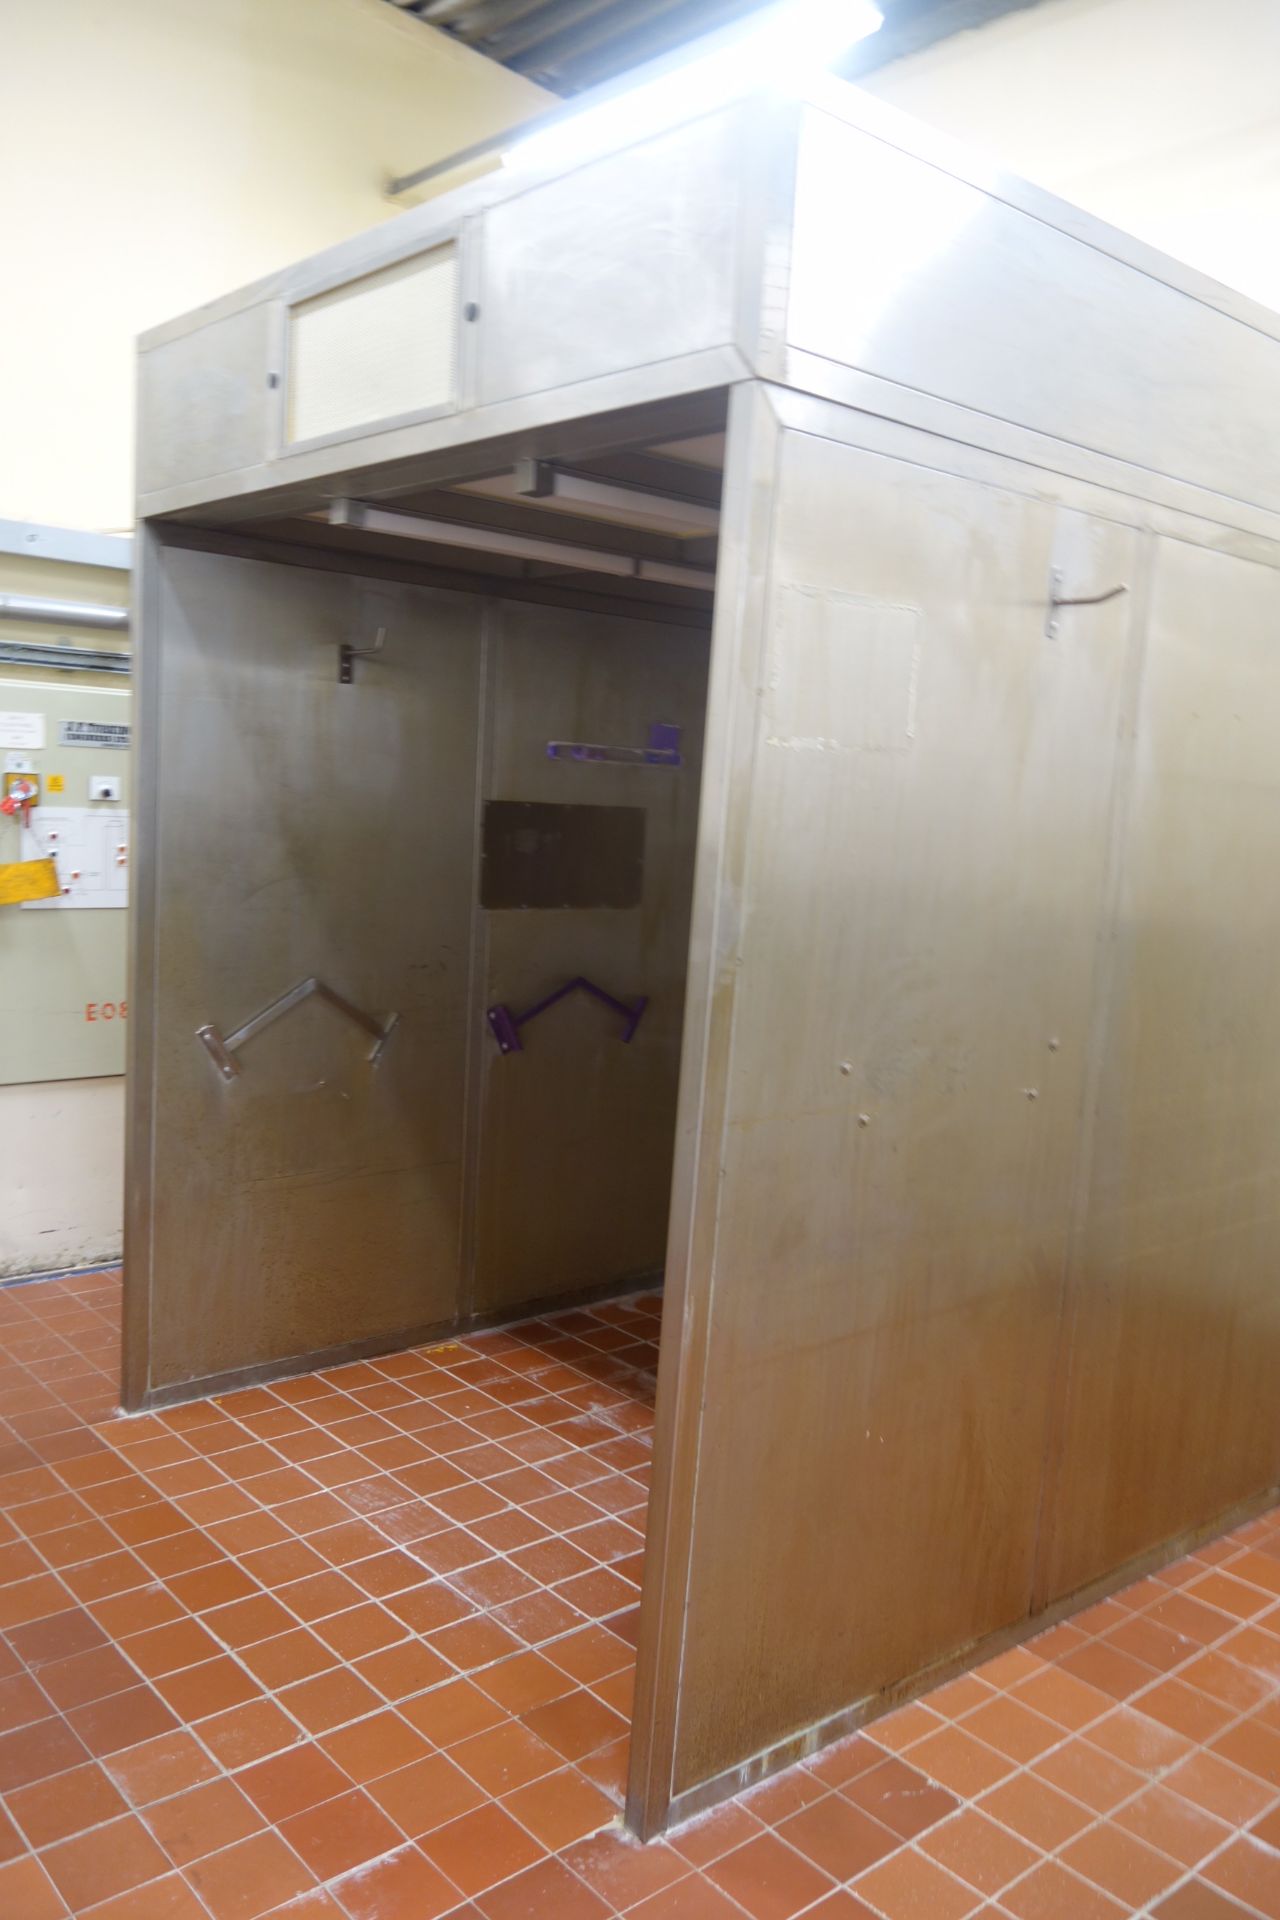 Dust Extraction Booth, internal dims 2m W x 1.9 L